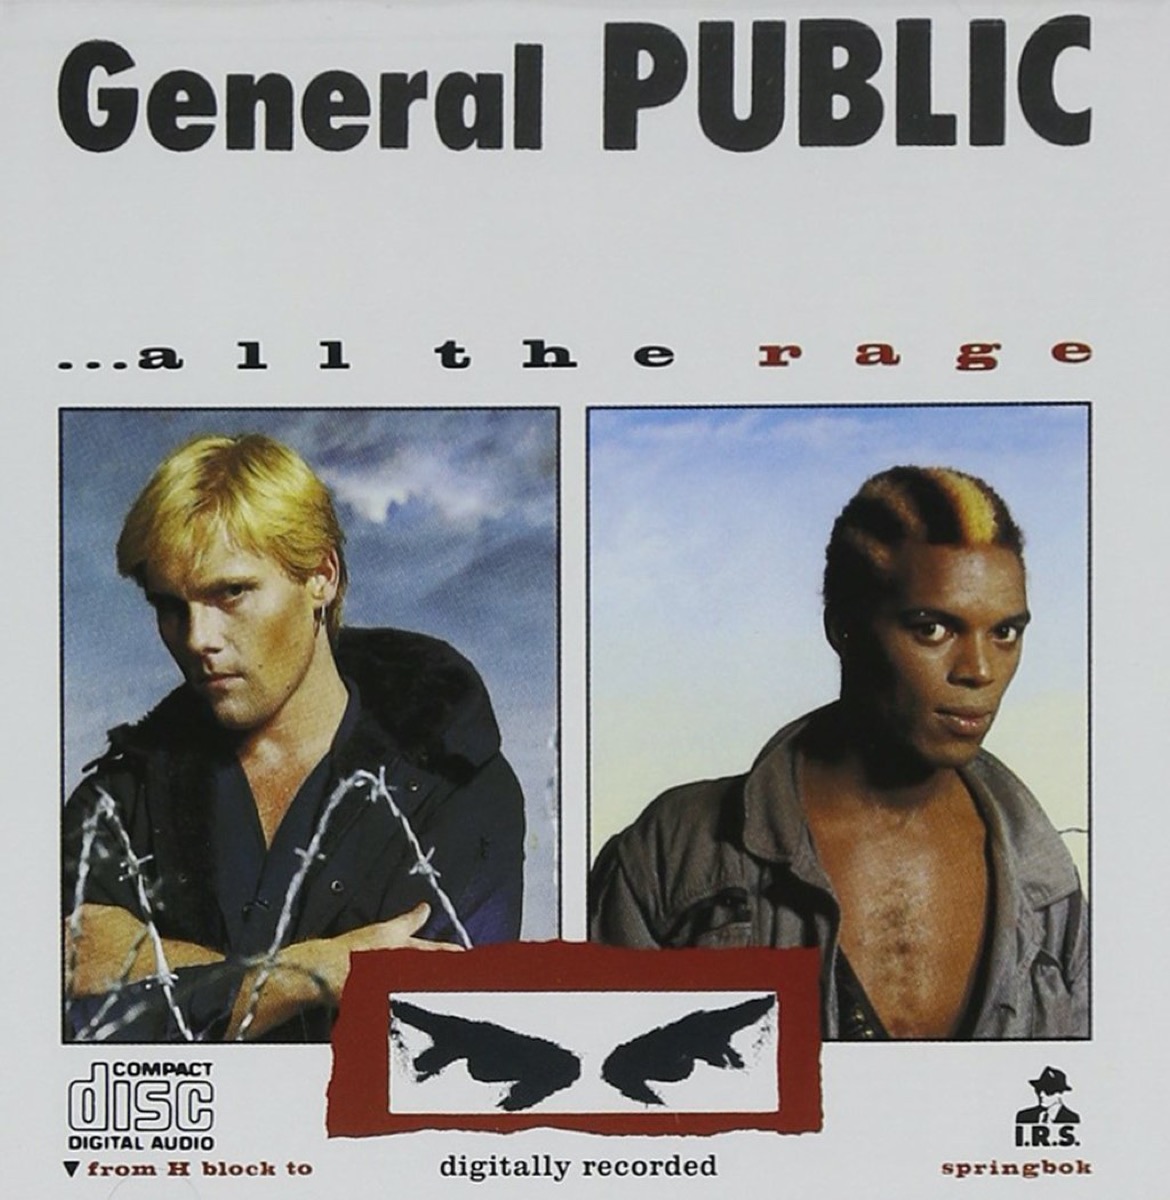 album cover of the band general public